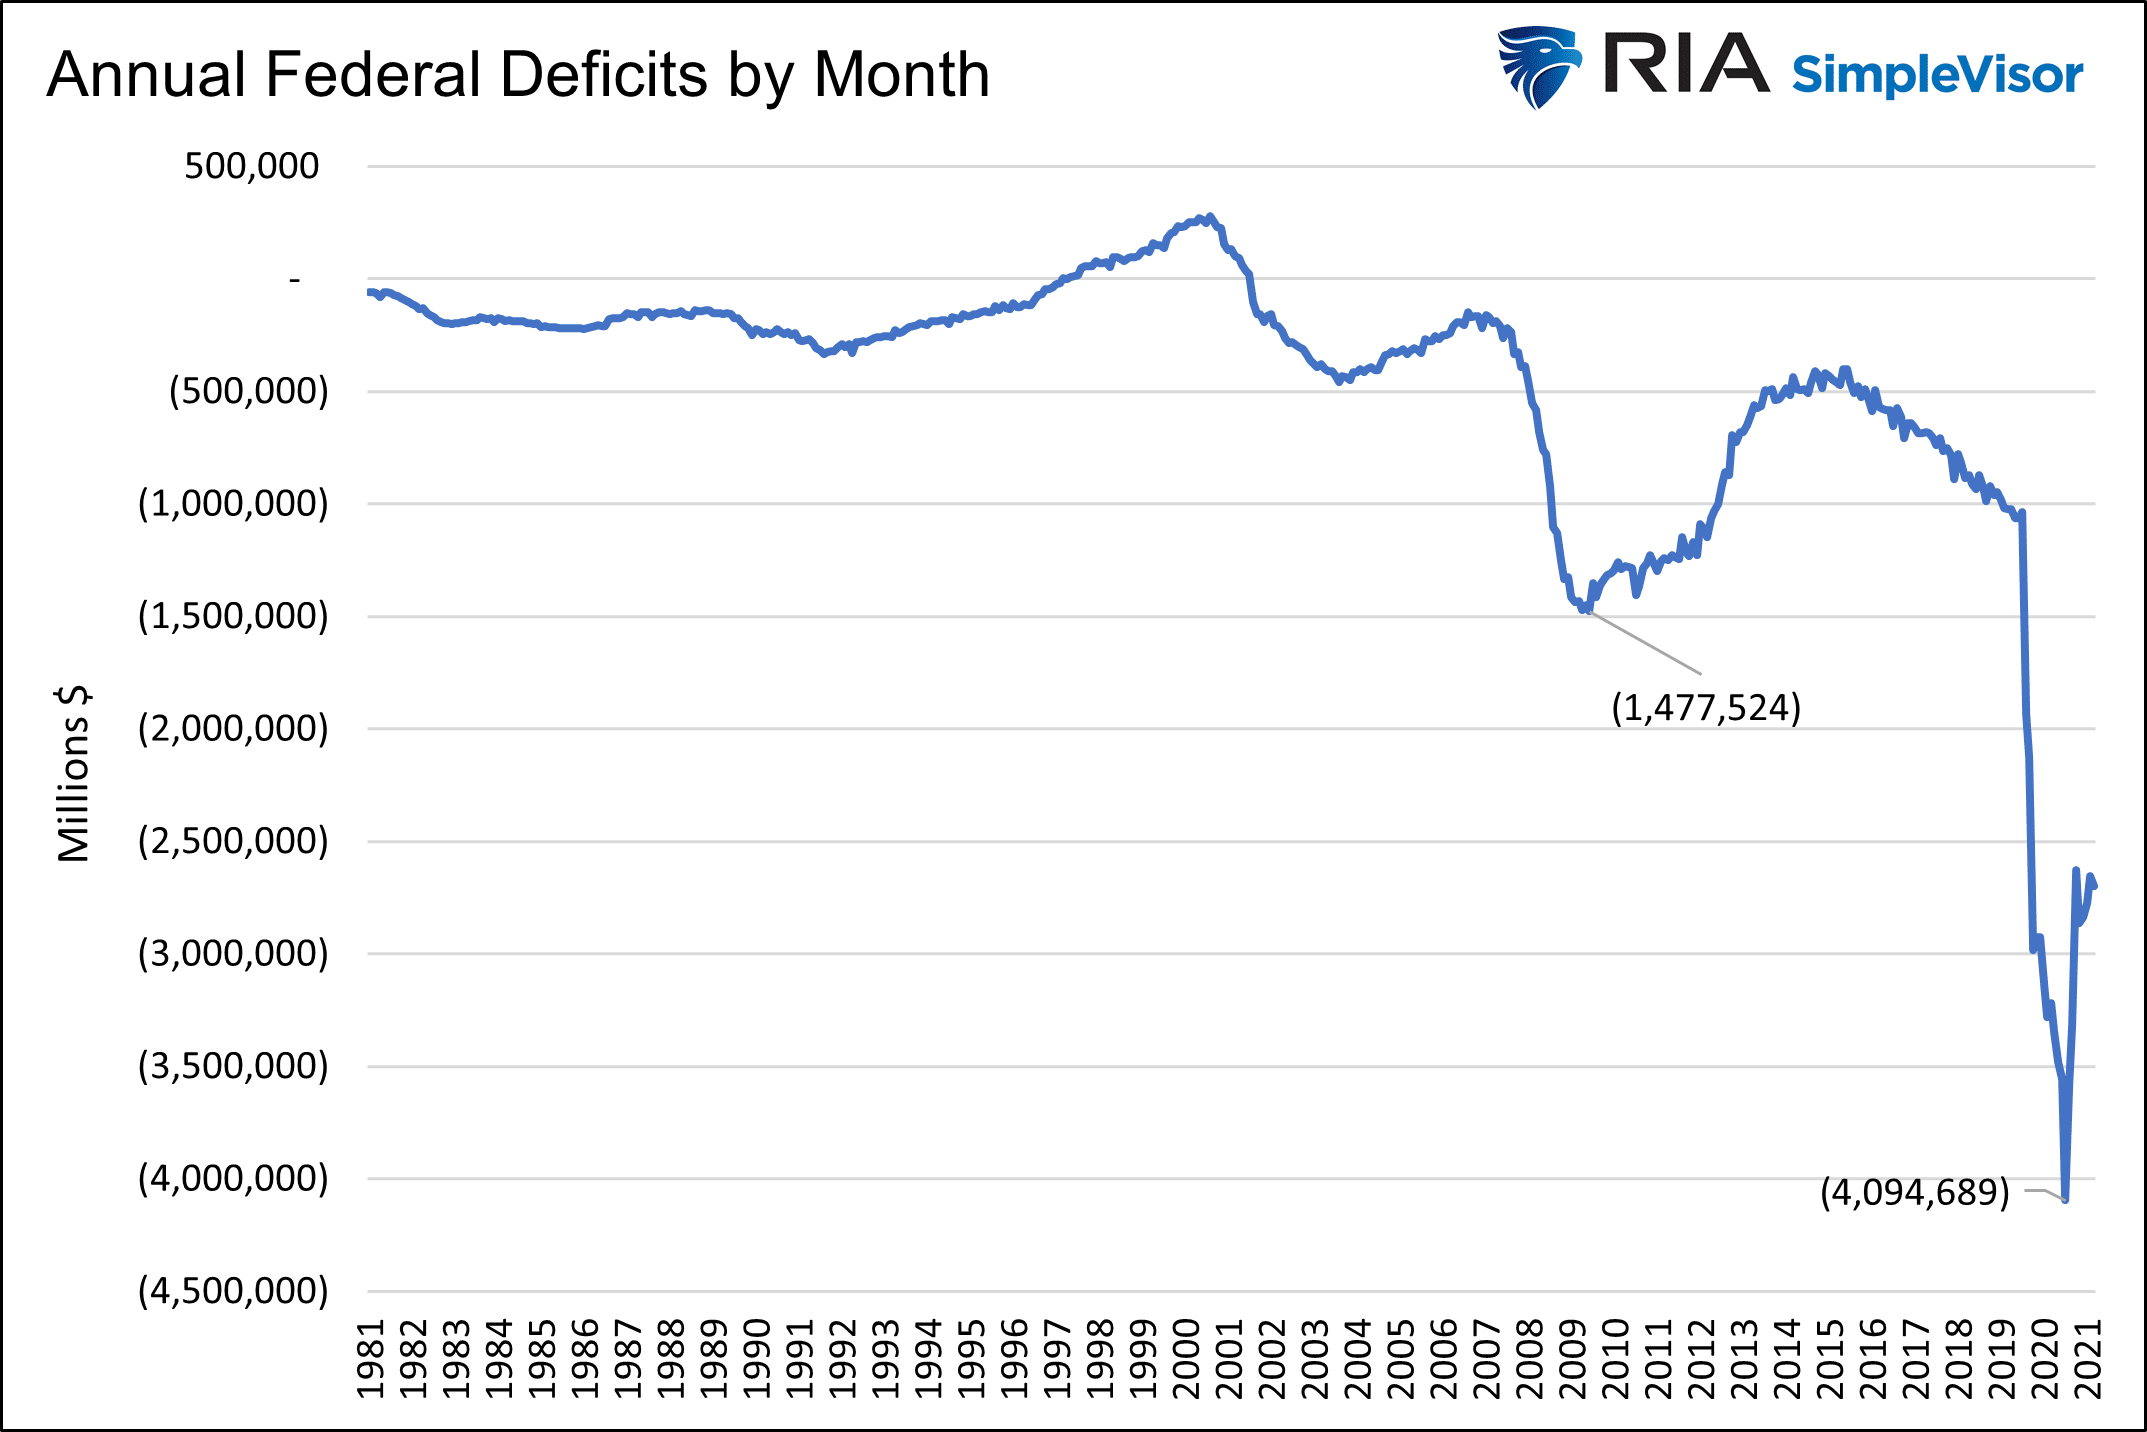 Annual Fed Deficits By Month